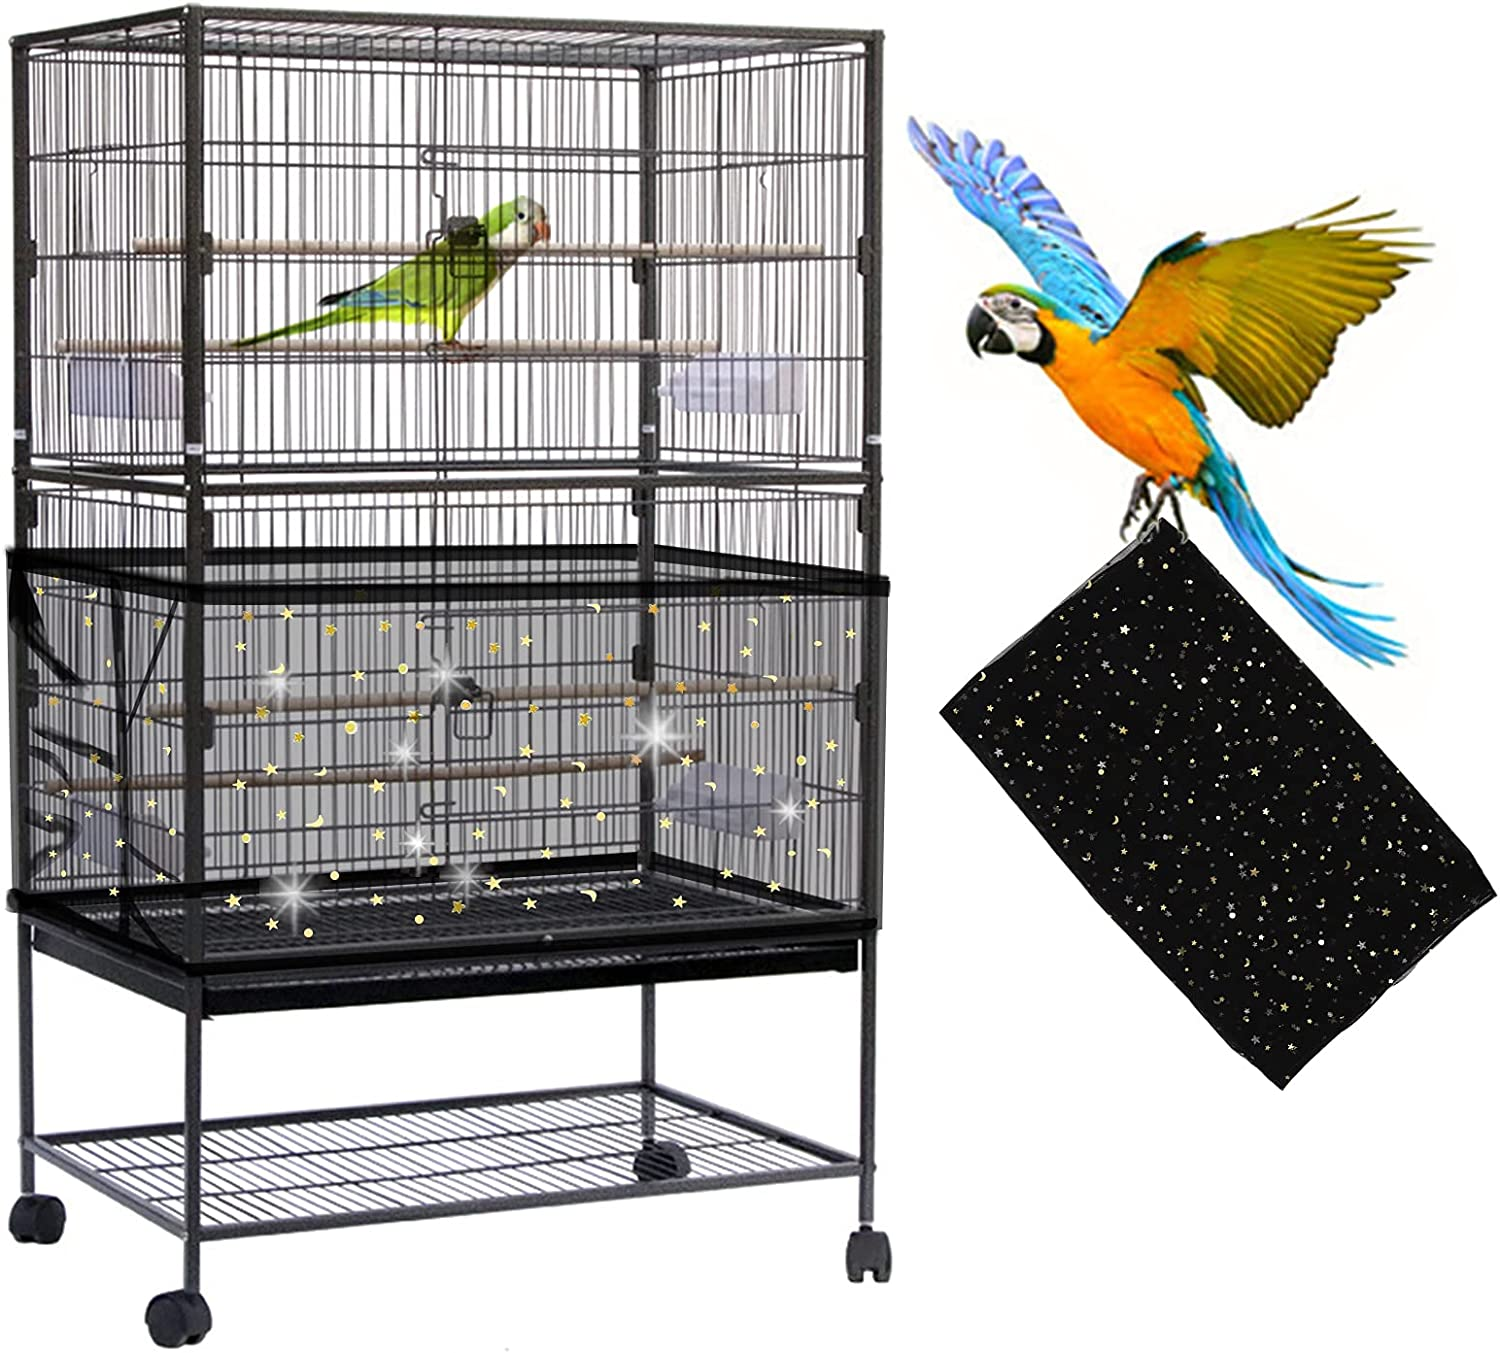 Large Bird Cage Cover,  Bird Cage Seed Catcher, Adjustable Soft Nylon Mesh Net with Twinkle Moon Star, Birdcage Cover Skirt Seed Guard for Parrot Parakeet Macaw round Square Cages (Black)